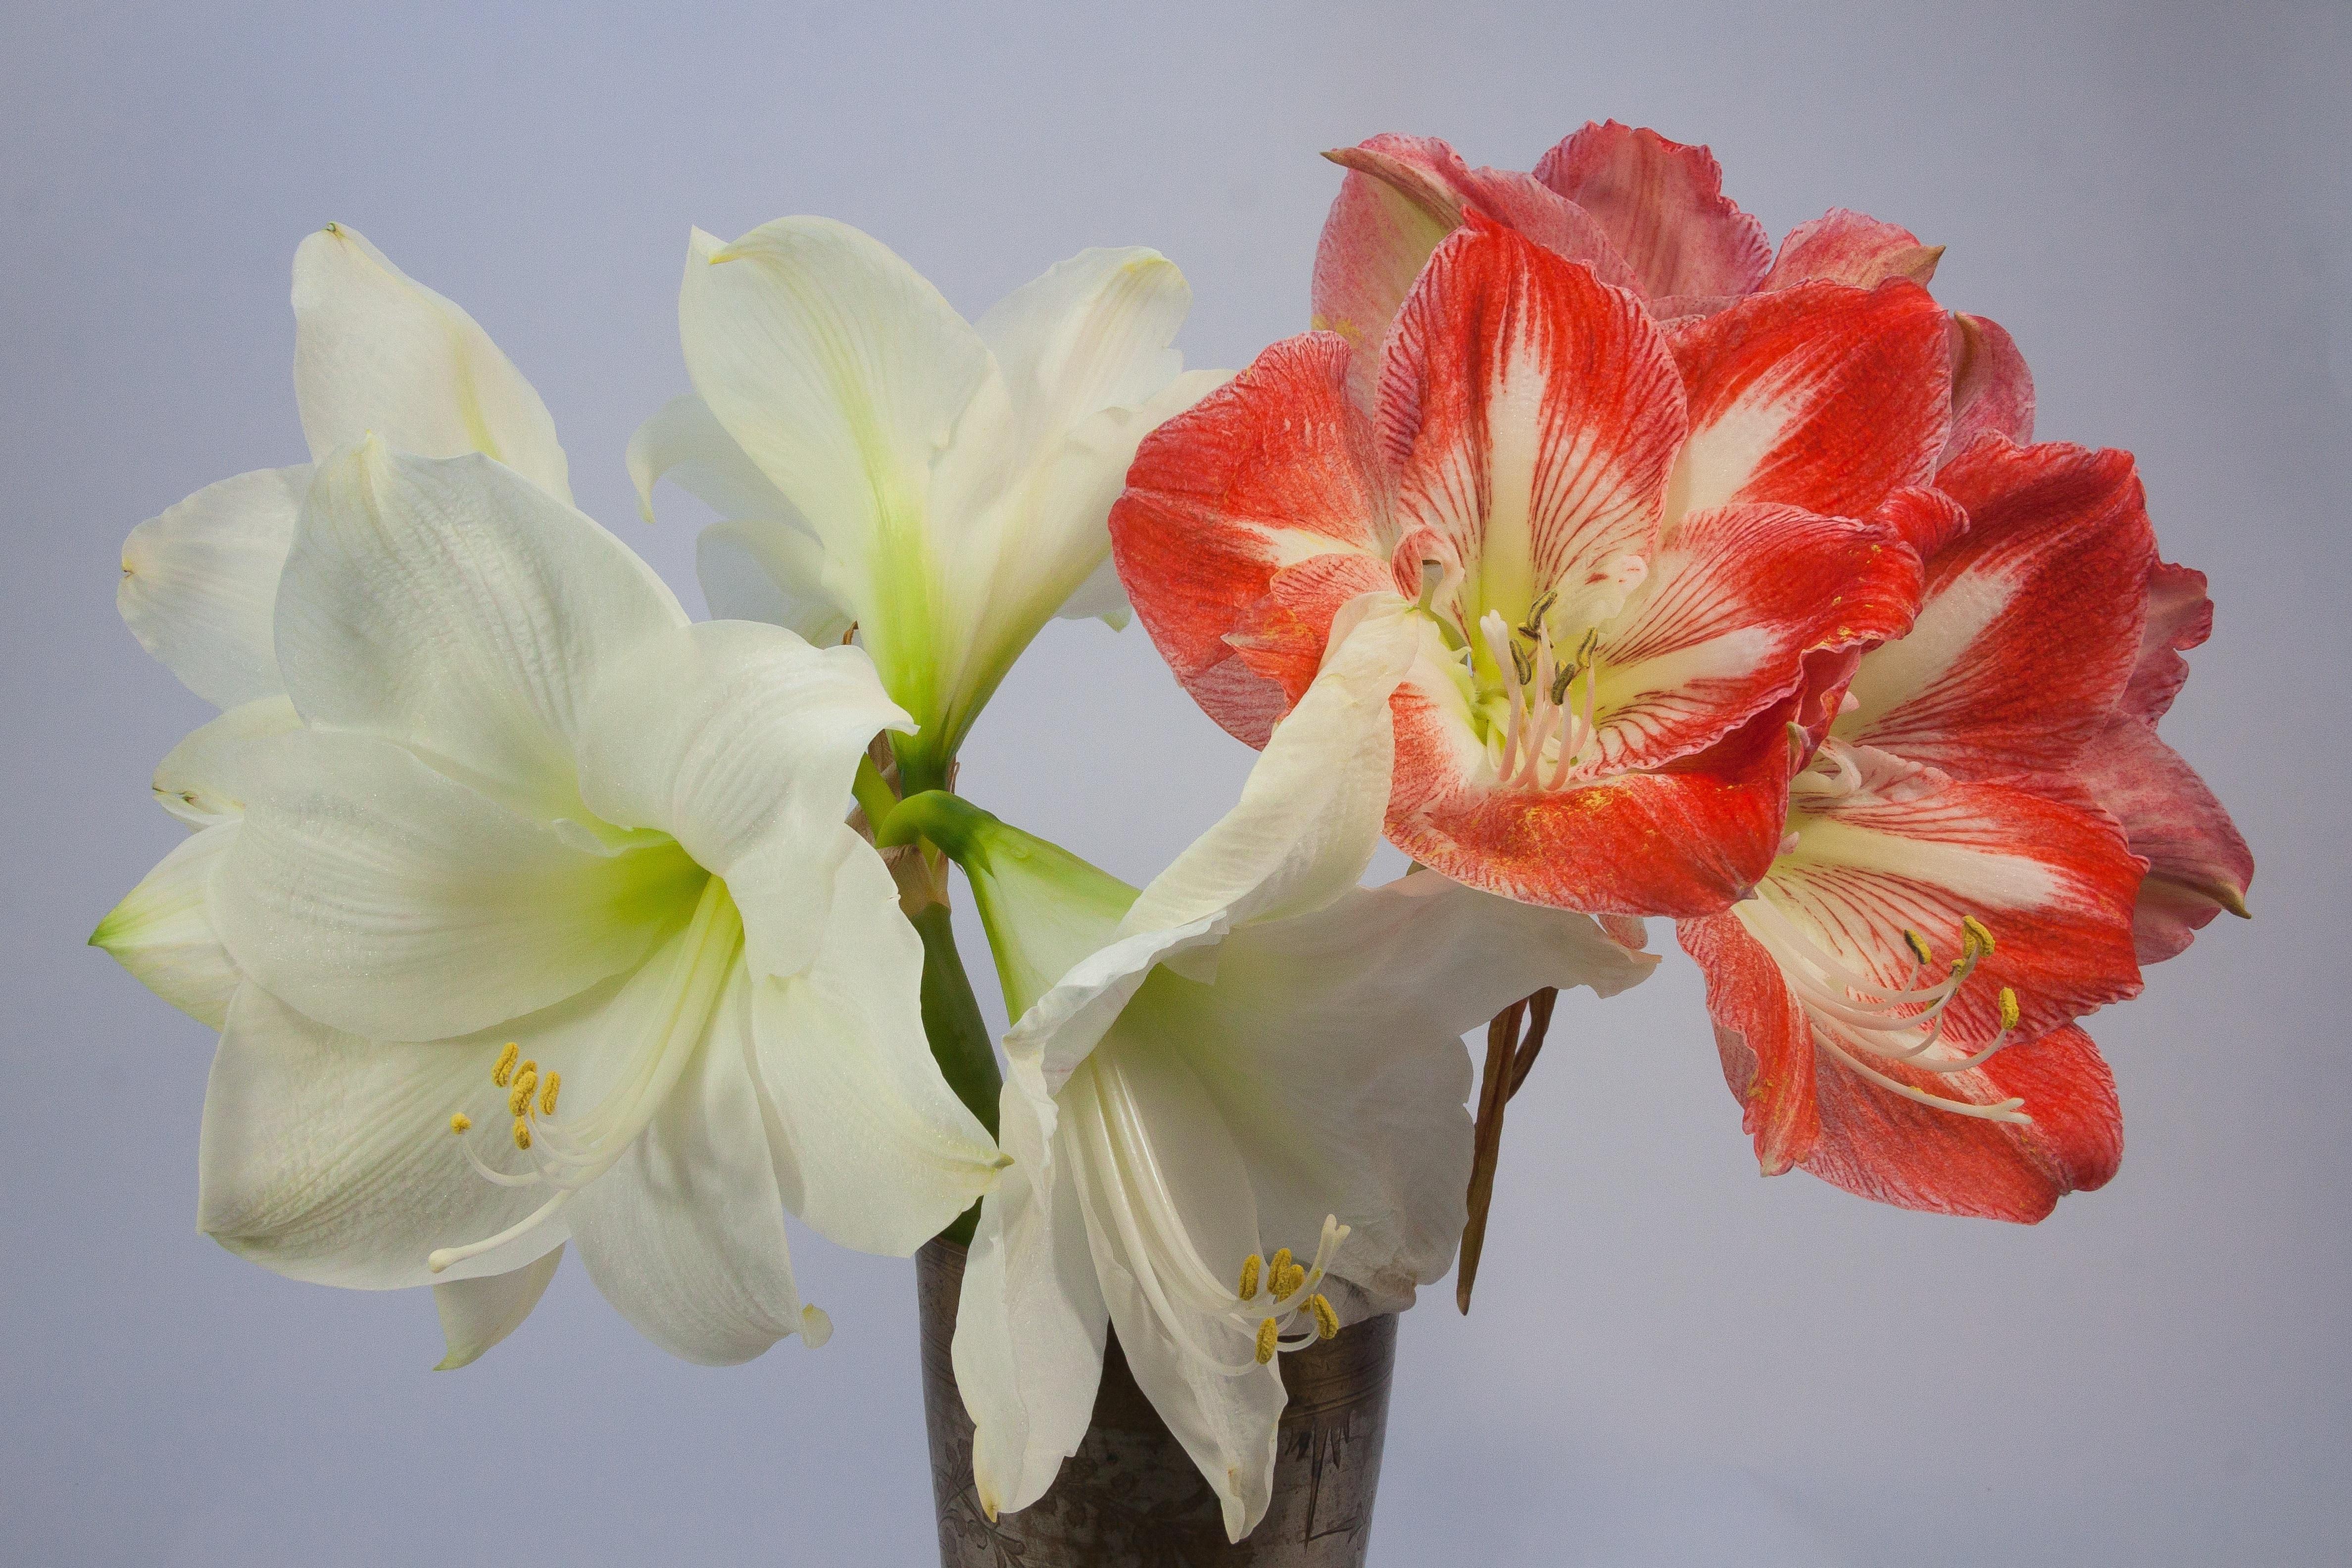 Red, Amaryllis, Blossom, White, Bloom, flower, no people free image